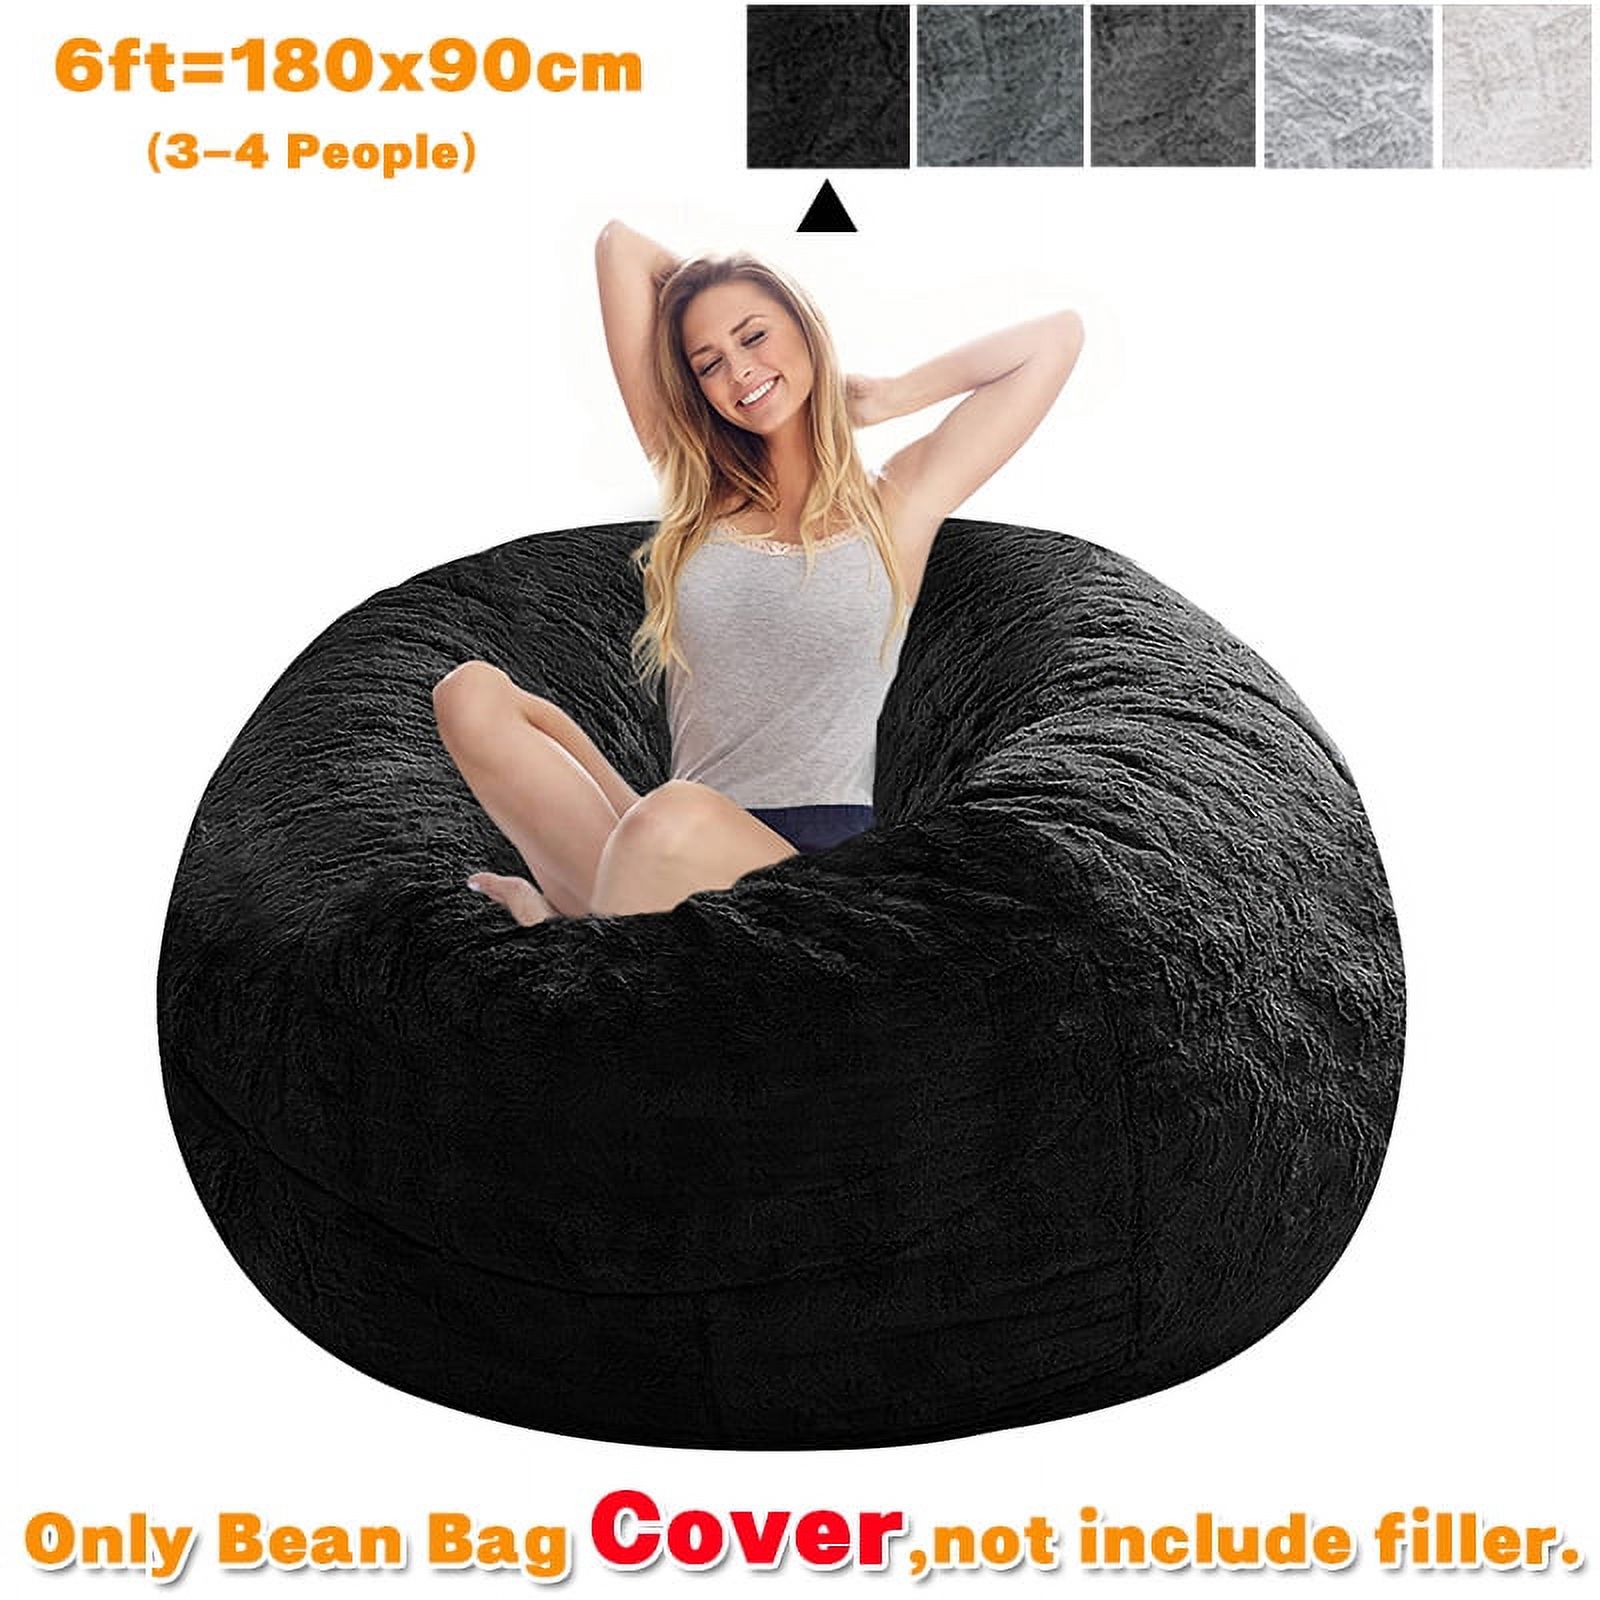 Multifunctional Bean Bag Chair, Large Adult Children's Living Room Furniture,  Soft And Comfortable Bean Bag Cover, Can Relax And Sleep Easy To Clean (NO  Filling) (Blcak, 6FT) 